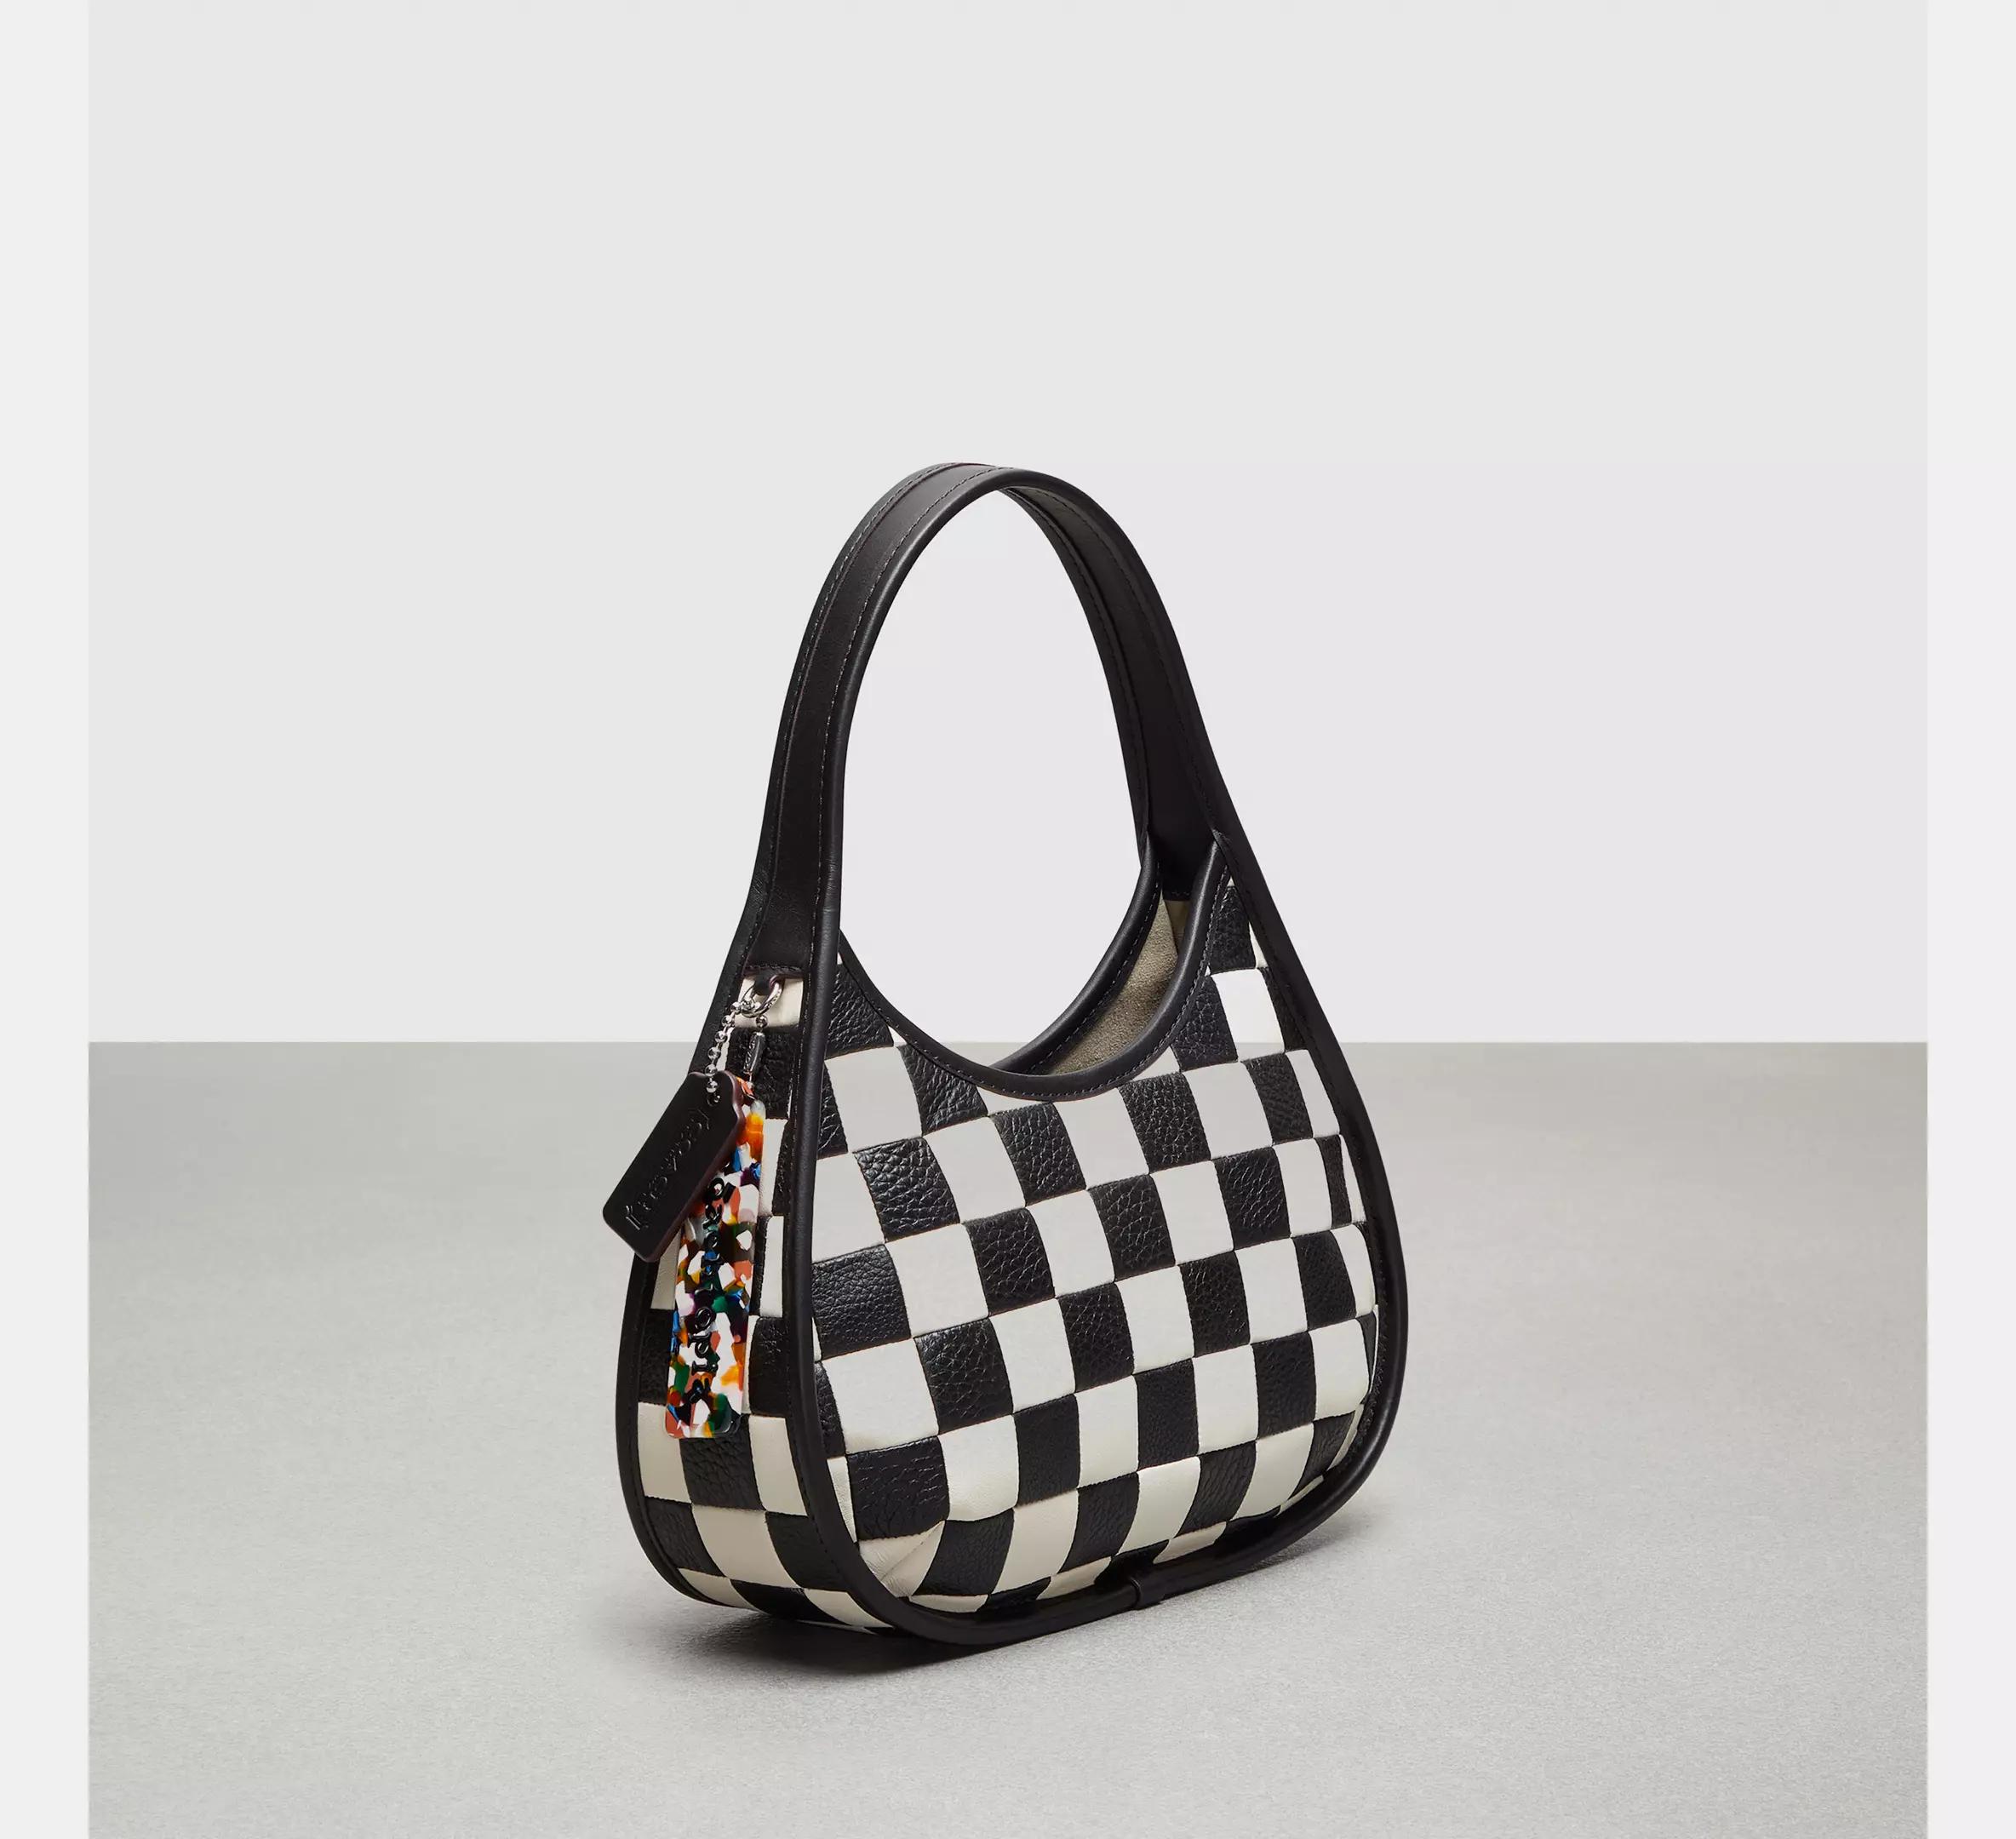 Túi Coach Ergo Bag In Checkerboard Patchwork Upcrafted Leather Nữ Đen